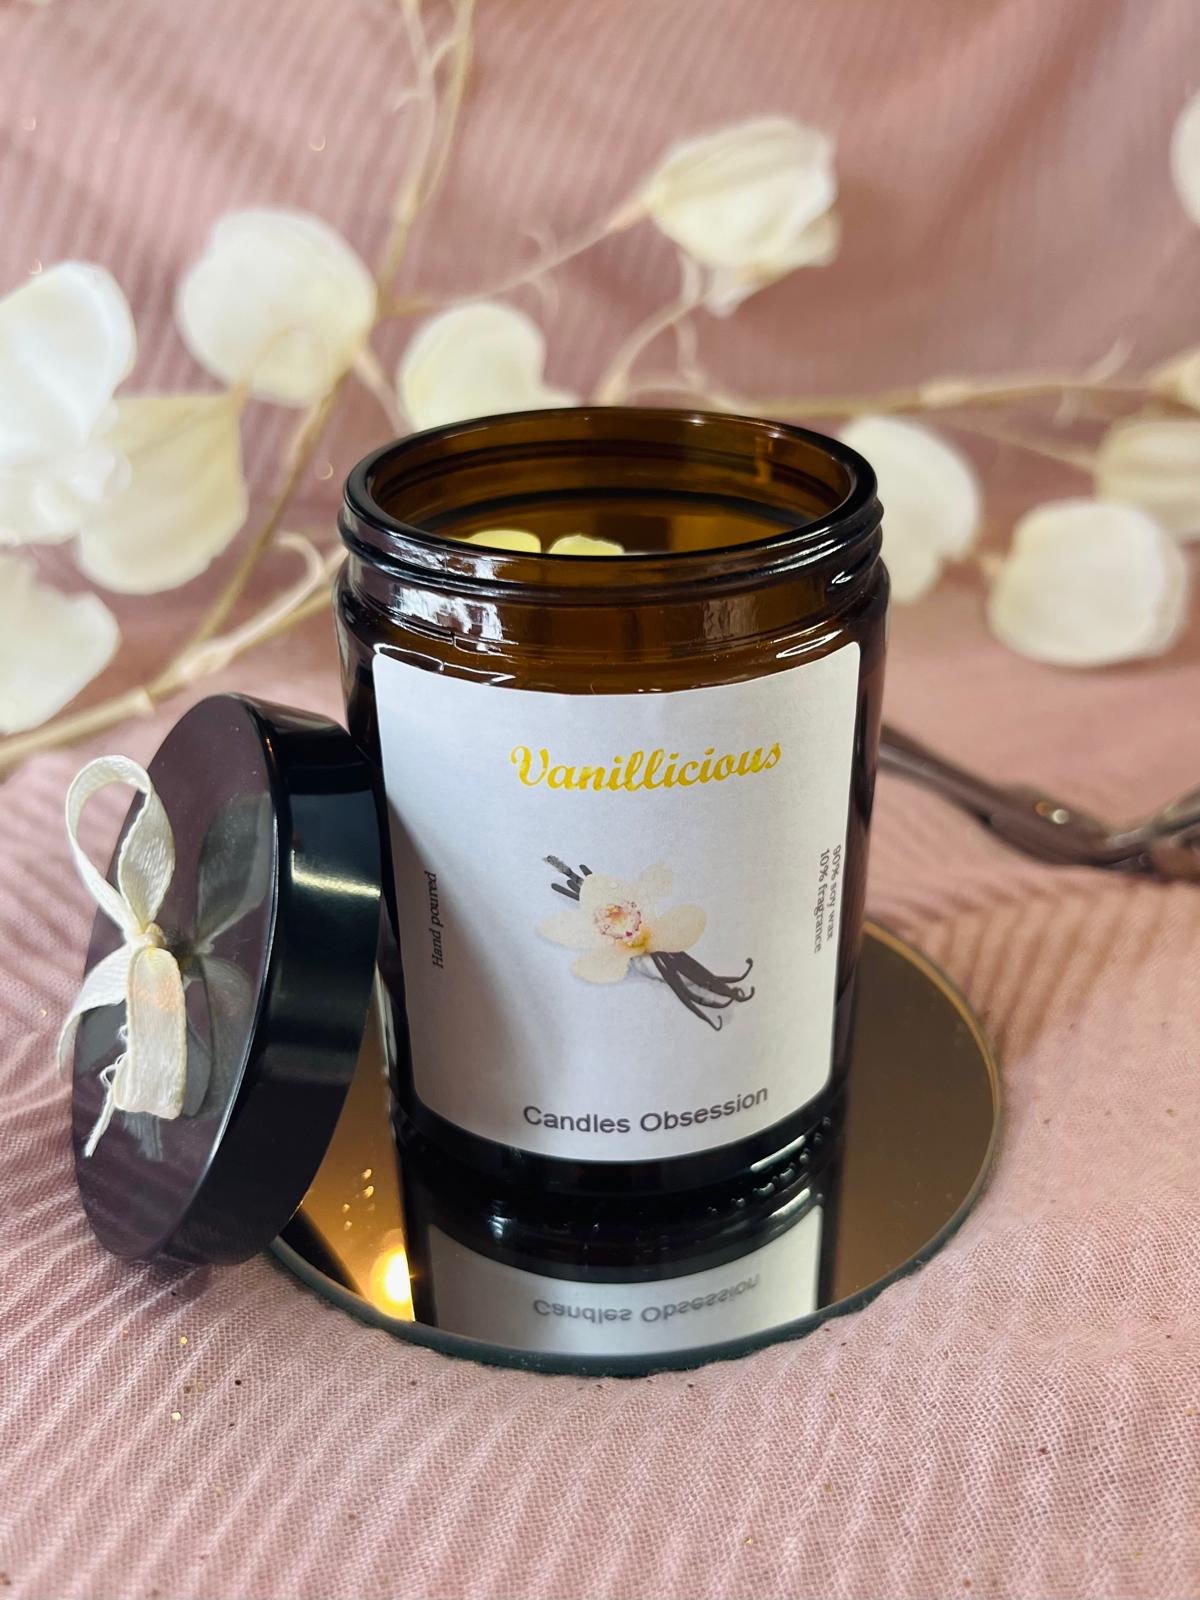 Vanillicious Glass Candle